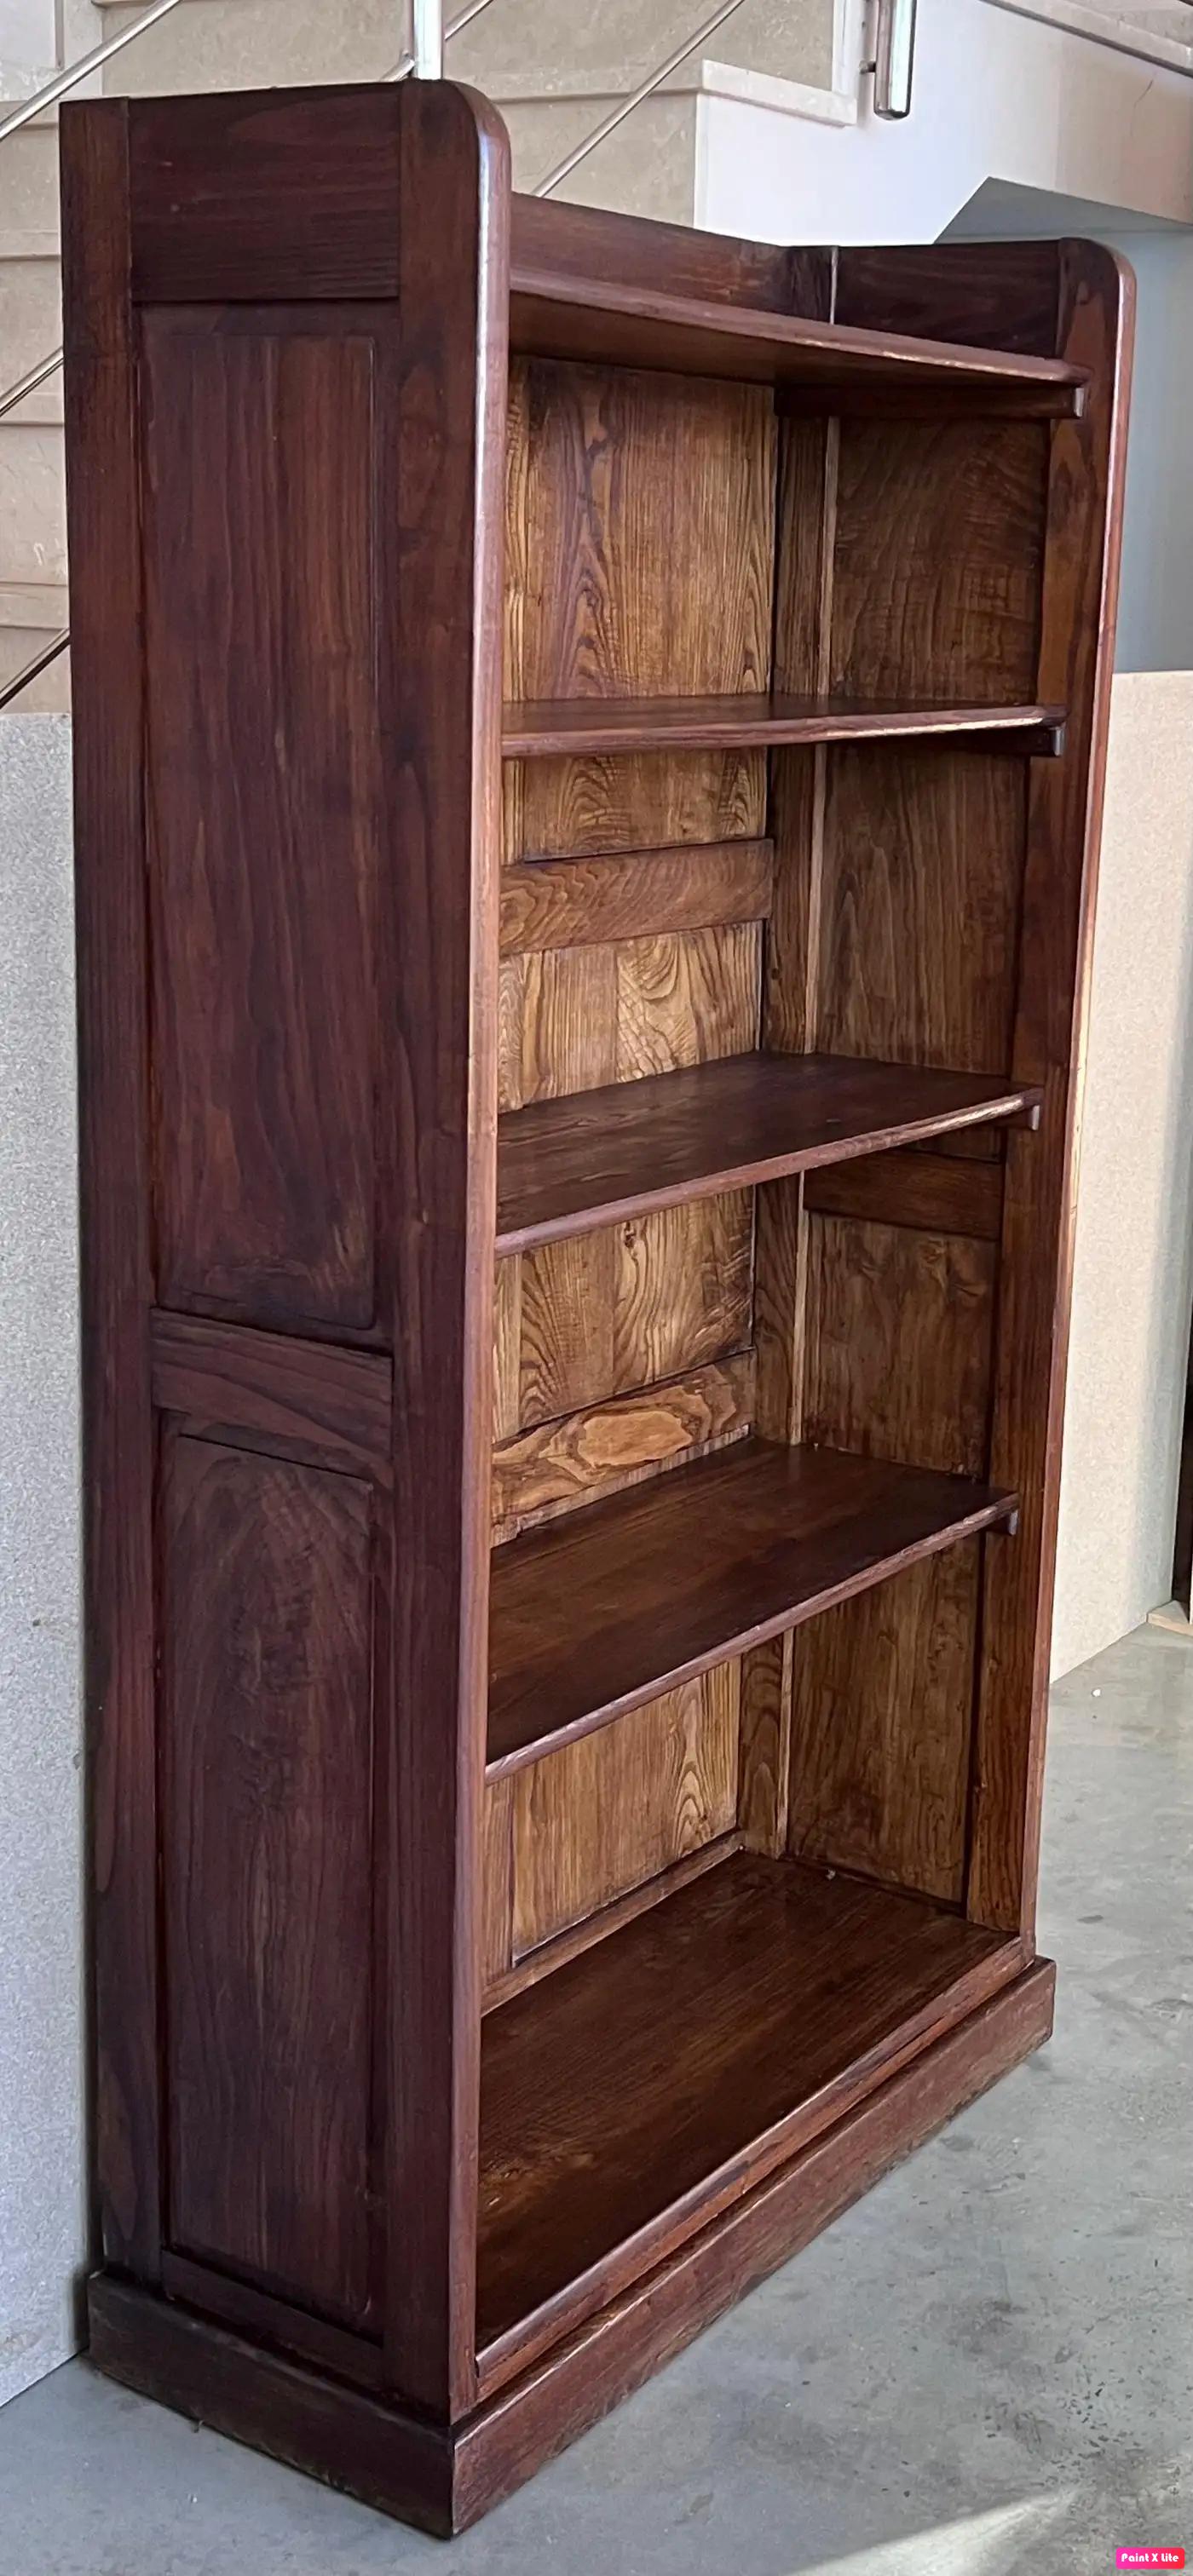 19th Solid Oak Bookcase or Etagere with Five Shelves In Good Condition For Sale In Miami, FL